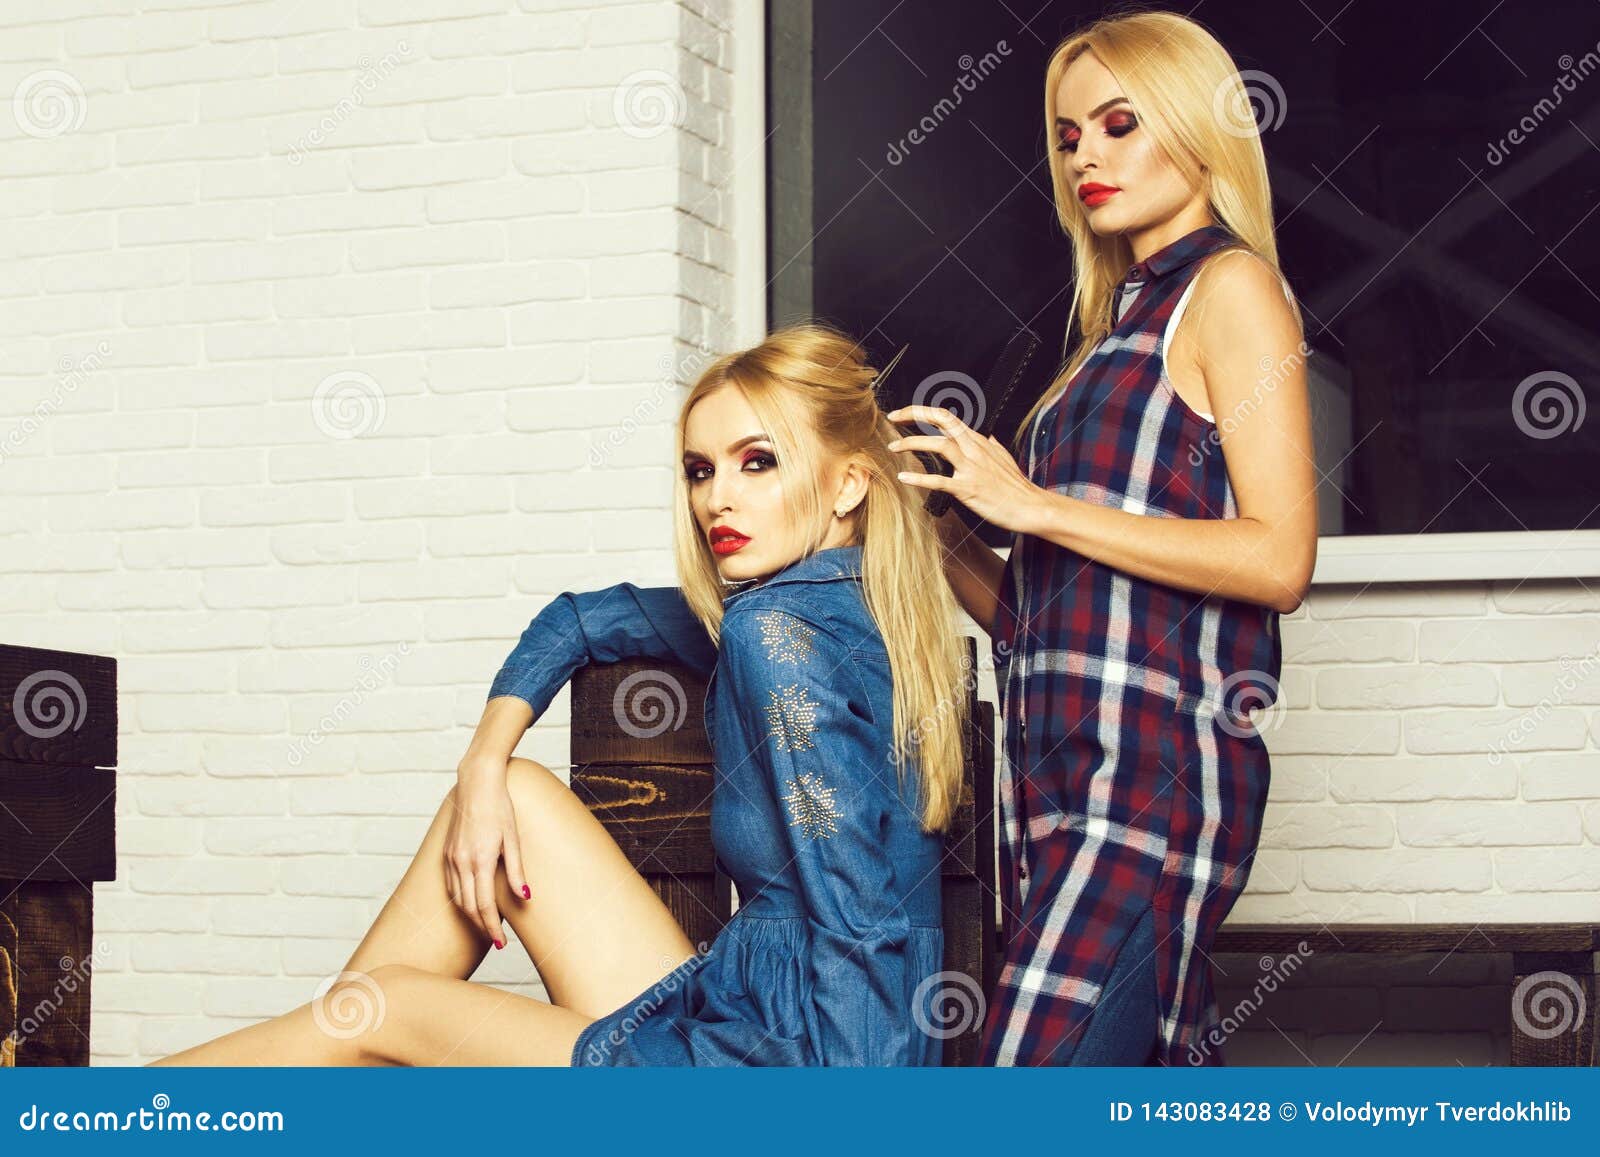 Pretty Girls in Beauty Salon, Makes Hairstyle Stock Photo - Image of long, client: 143083428